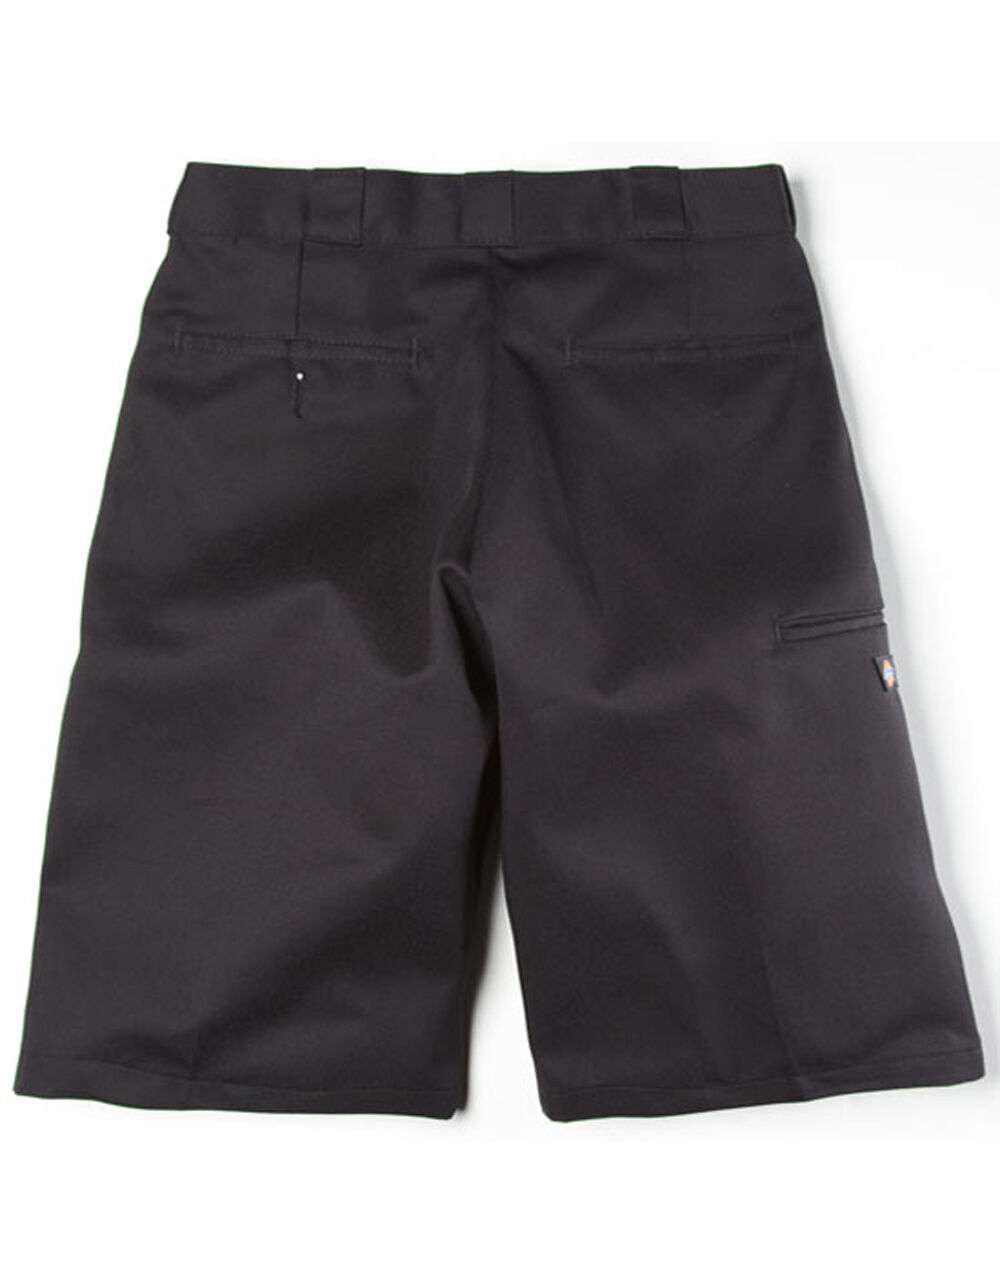 DICKIES Mens Relaxed Fit Shorts image number 1